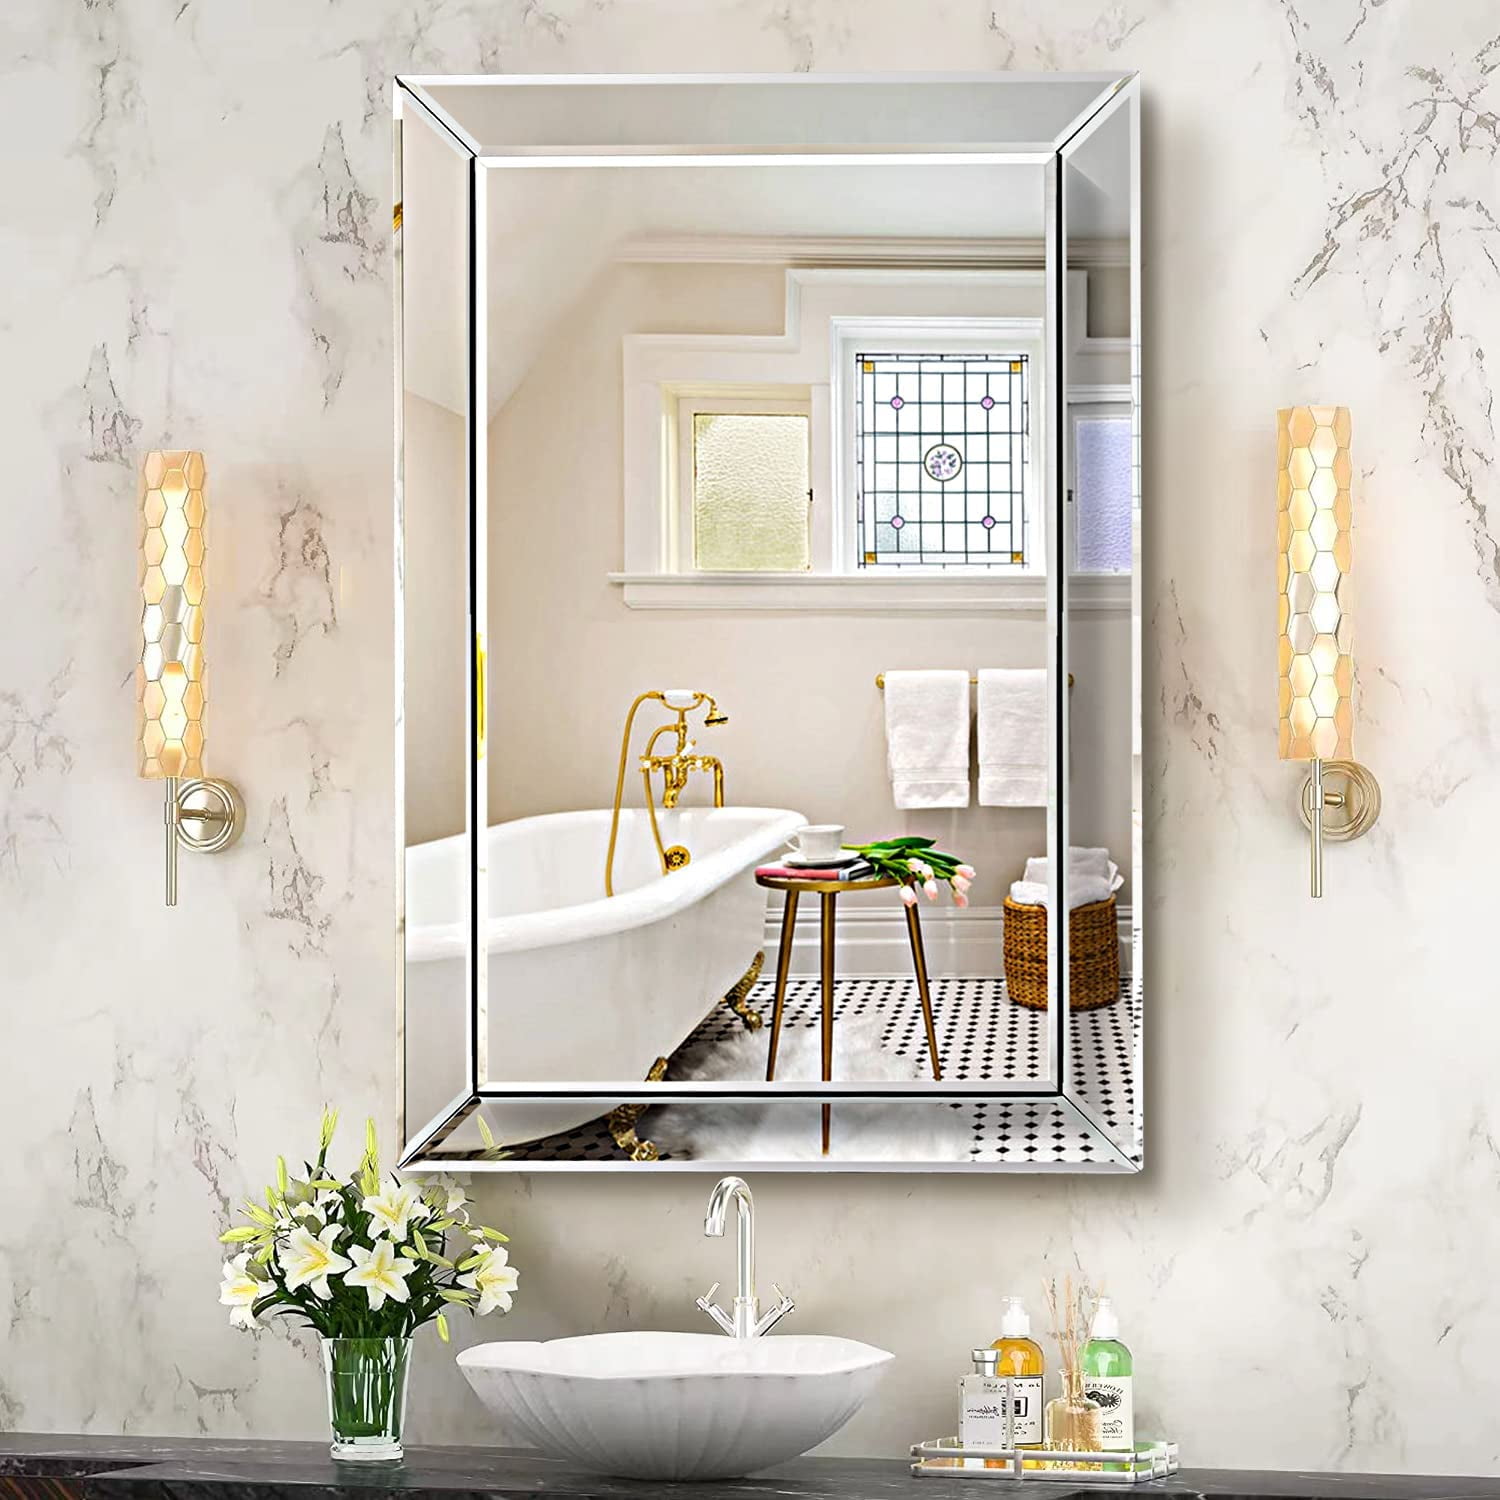 Noble Houe Rectangular Glam Brick Patterned Wall Mirror, Clear -  Walmart.com